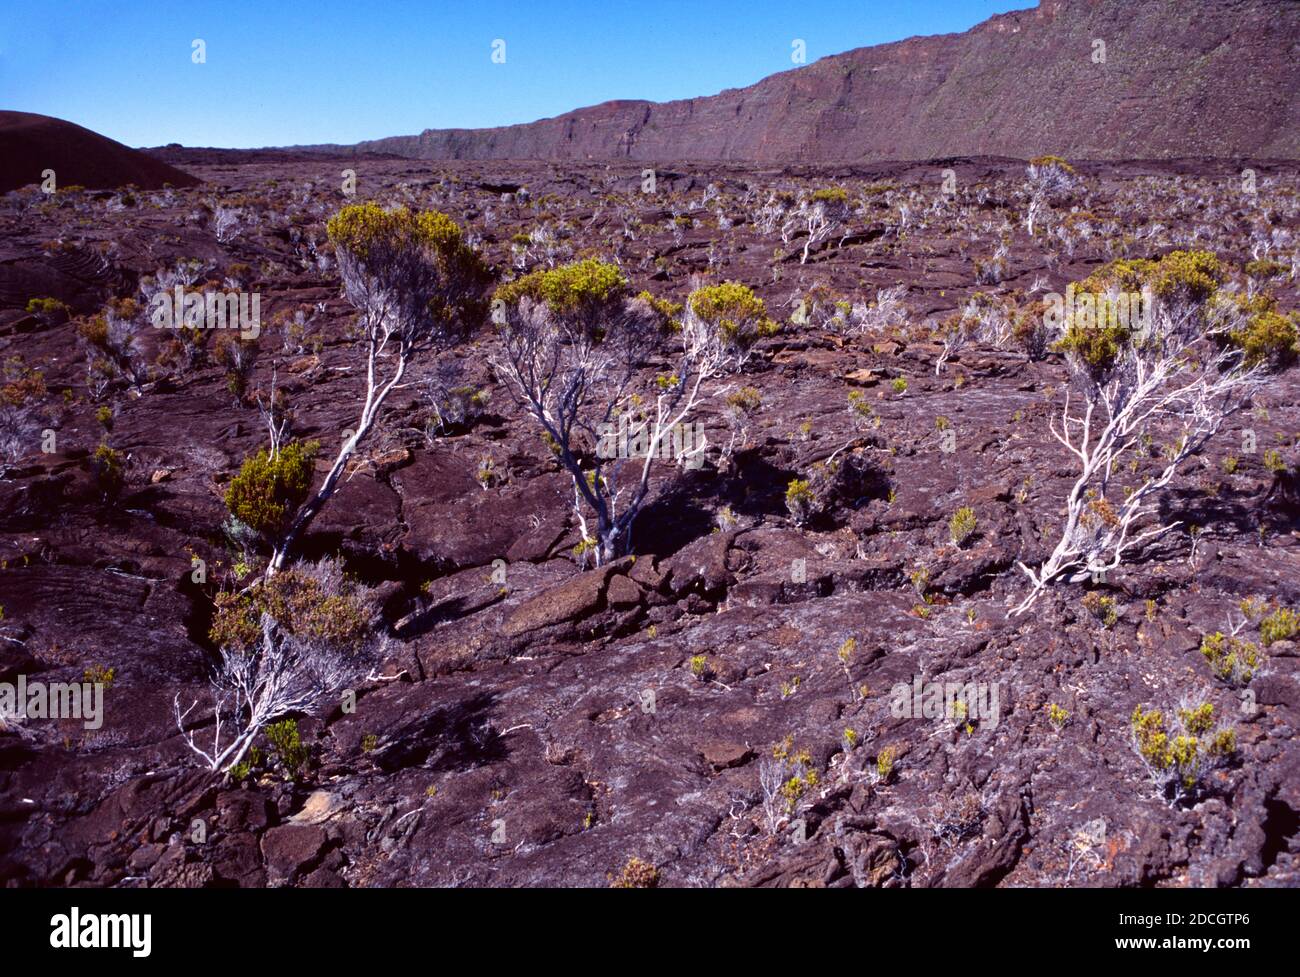 Volcanic Landscape or Moorland with Heath or Heather, Philippia montana, Growing on Lava Rock on the Flanks of the Piton de la Fournaise Volcano La Reunion or Reunion Island France Stock Photo